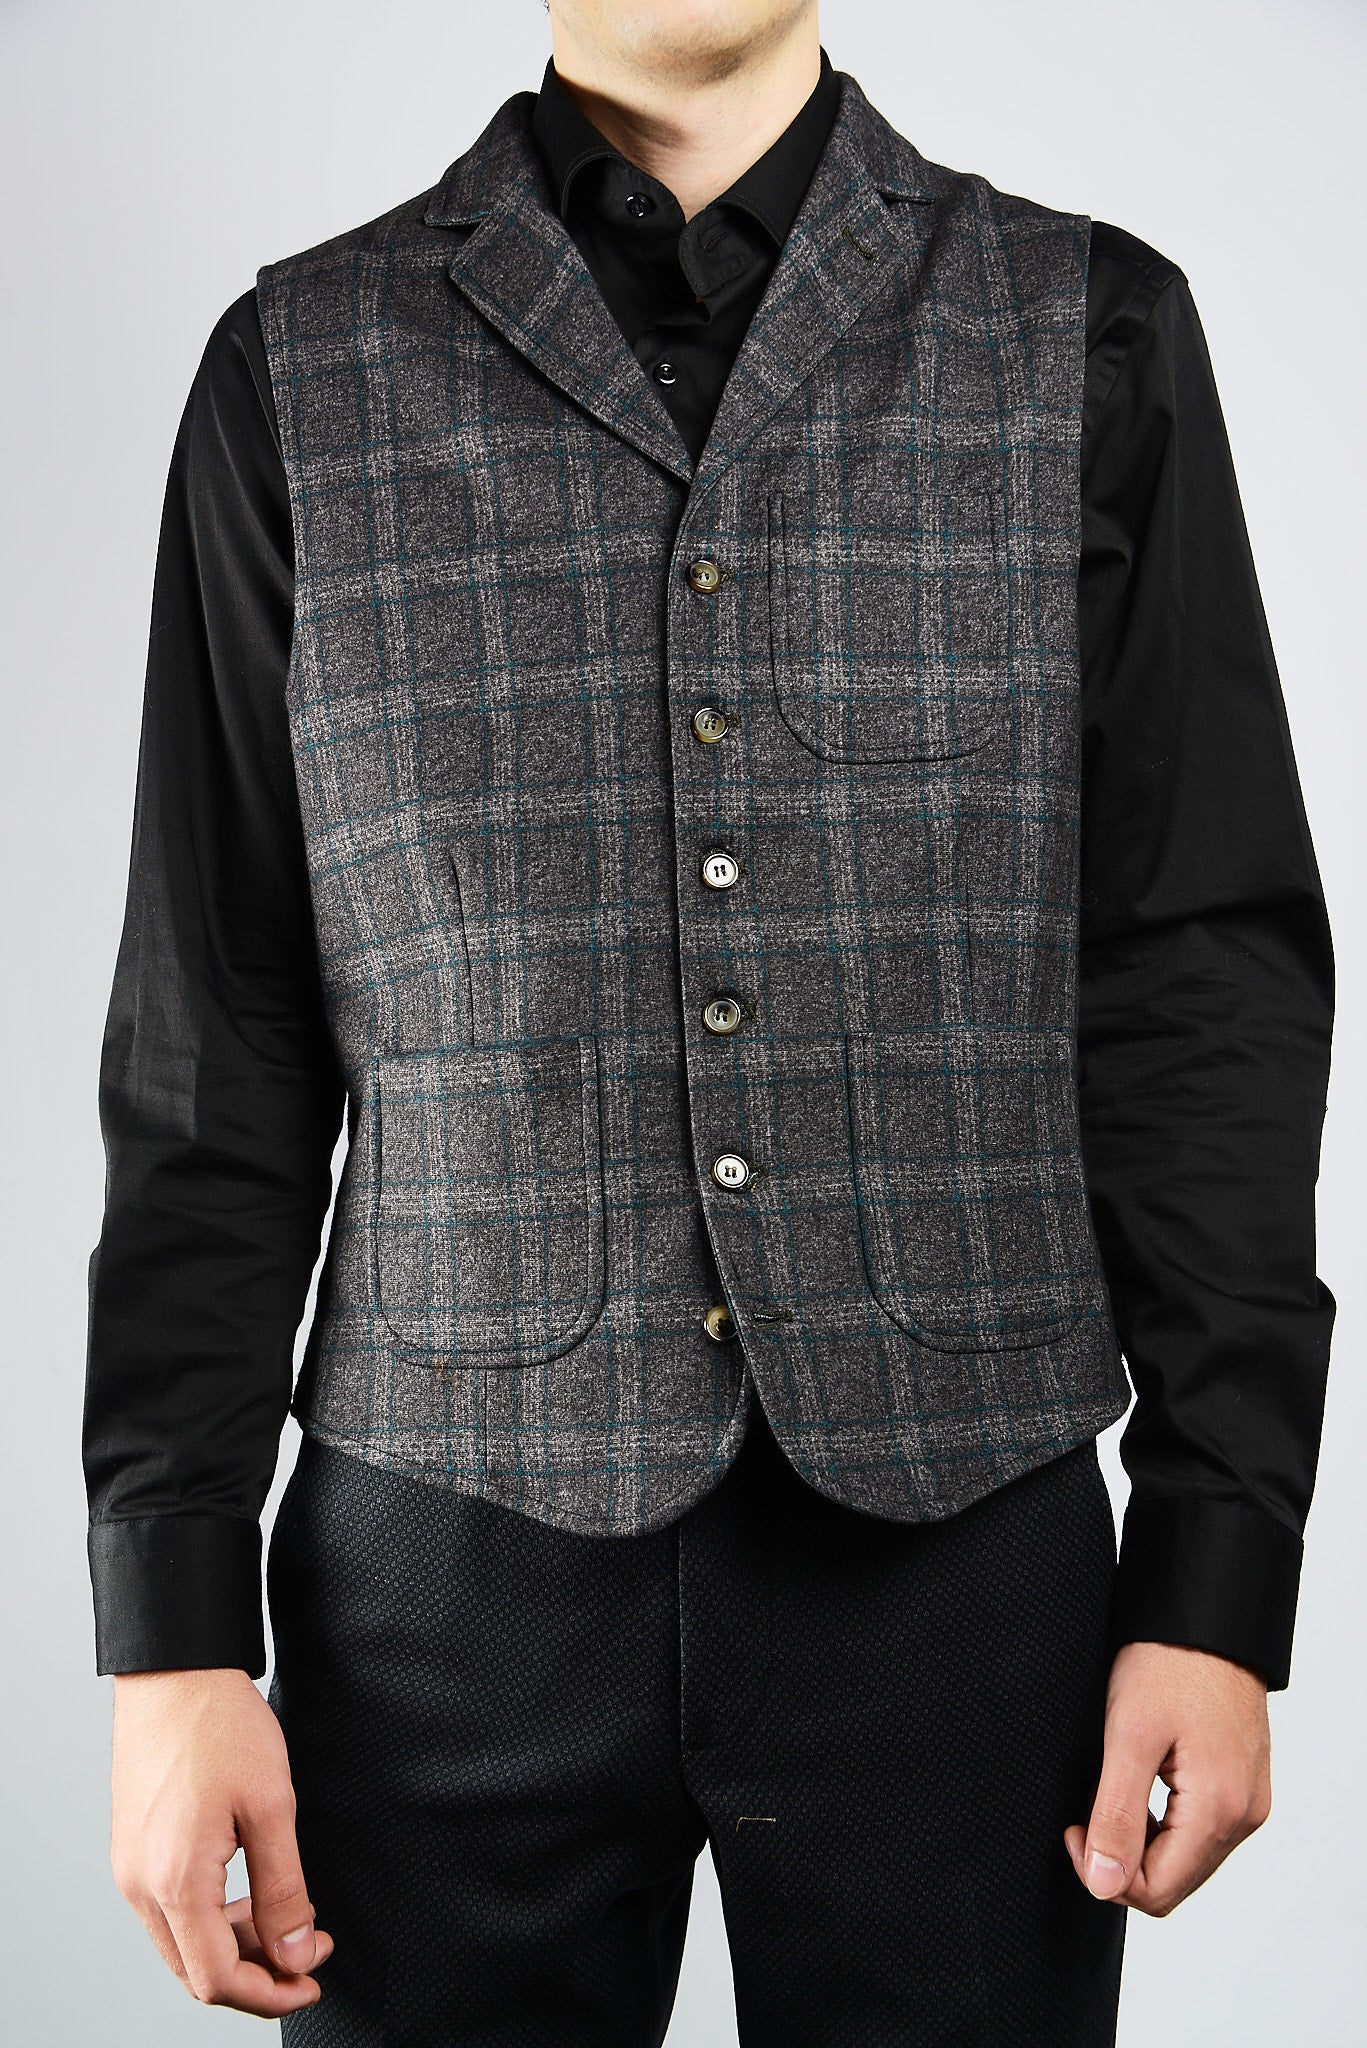 Hampstead Multi Check Soft Touch Waistcoat